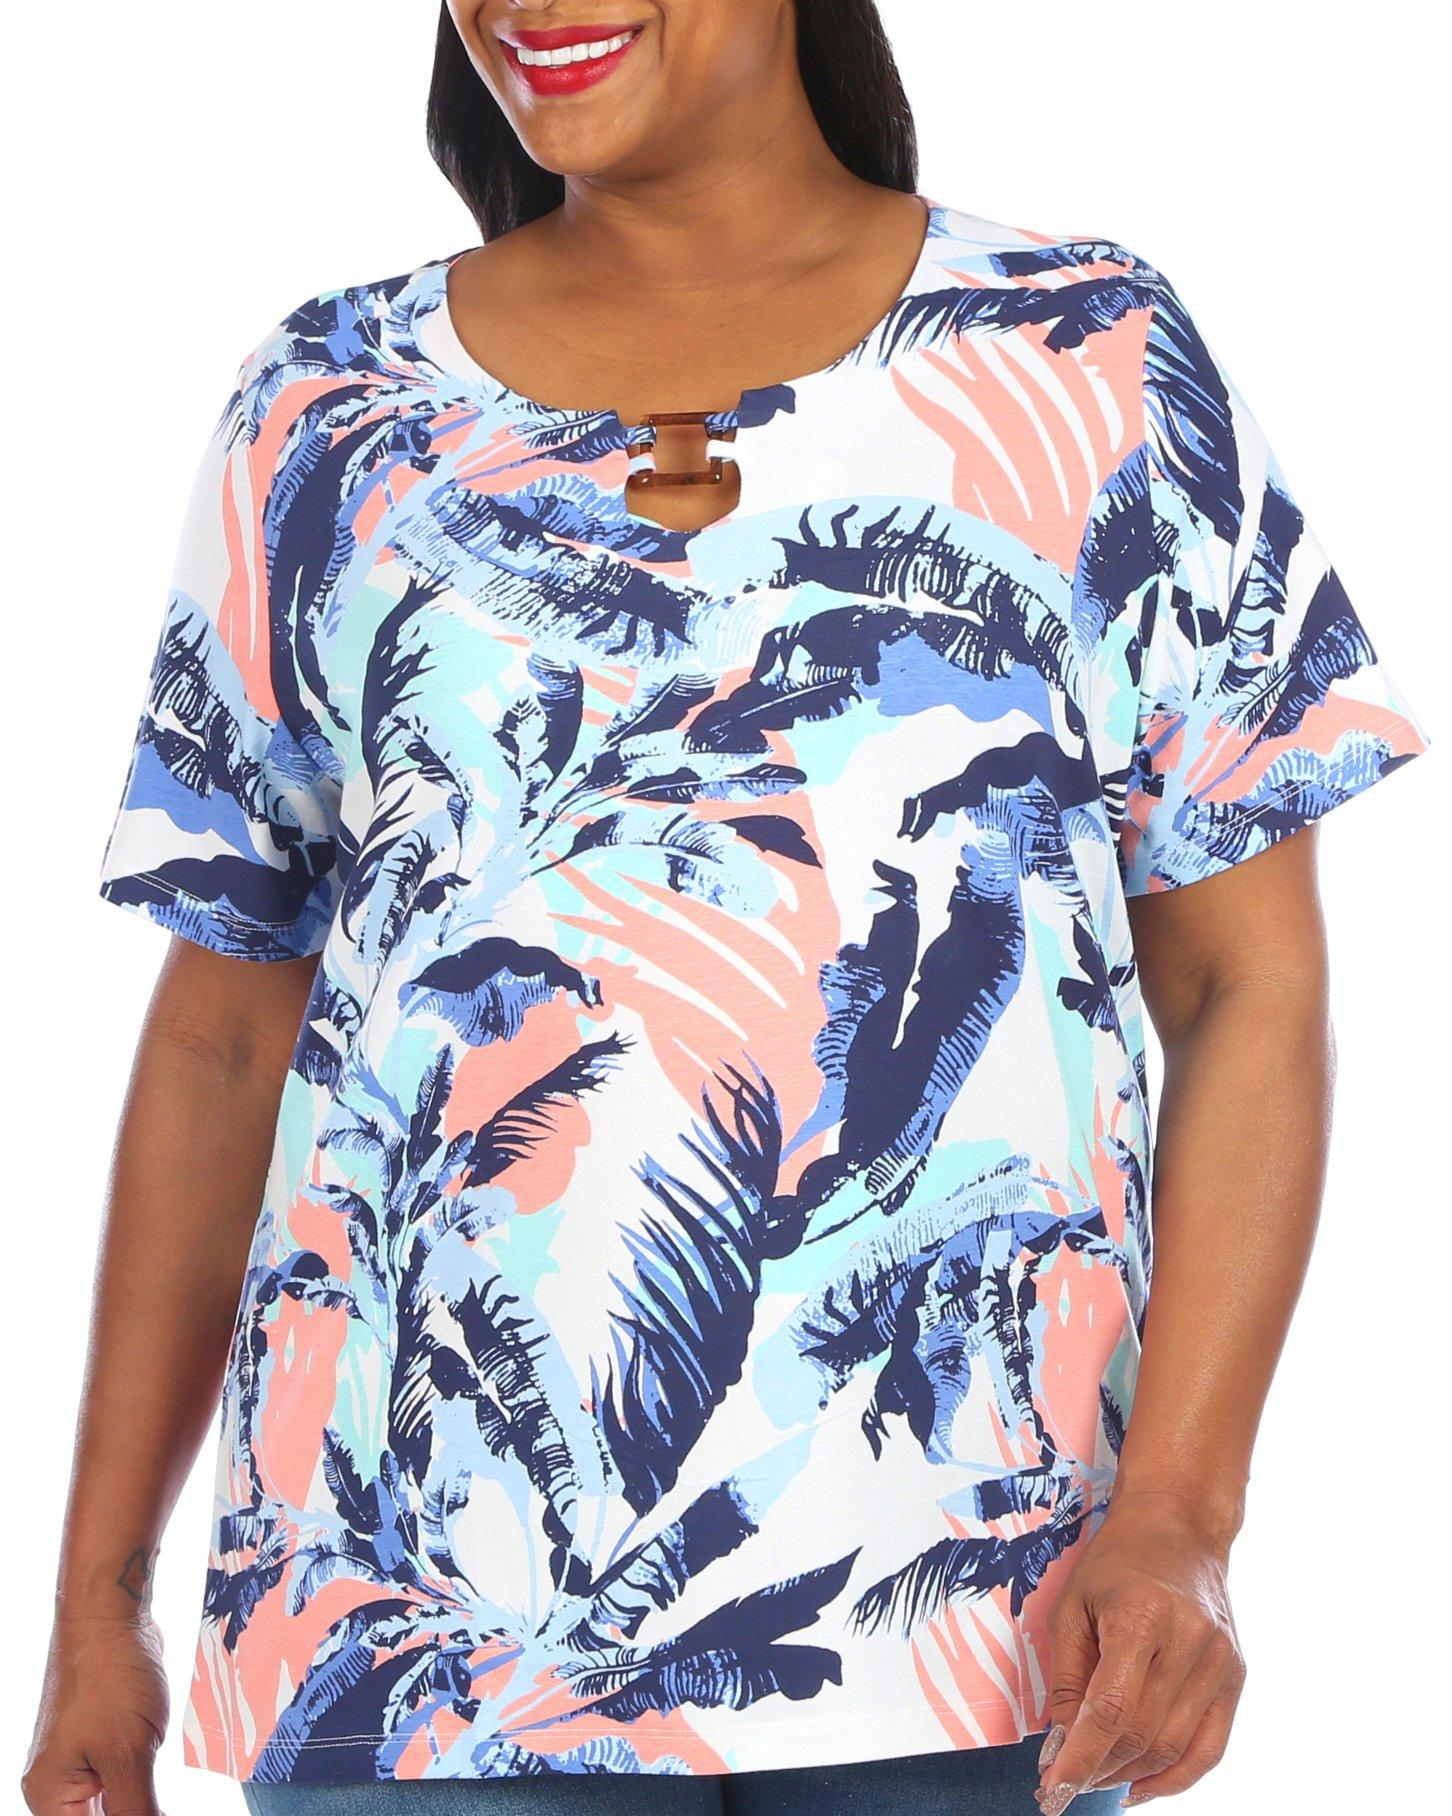 Coral Bay Plus Square Ring Keyhole Short Sleeve